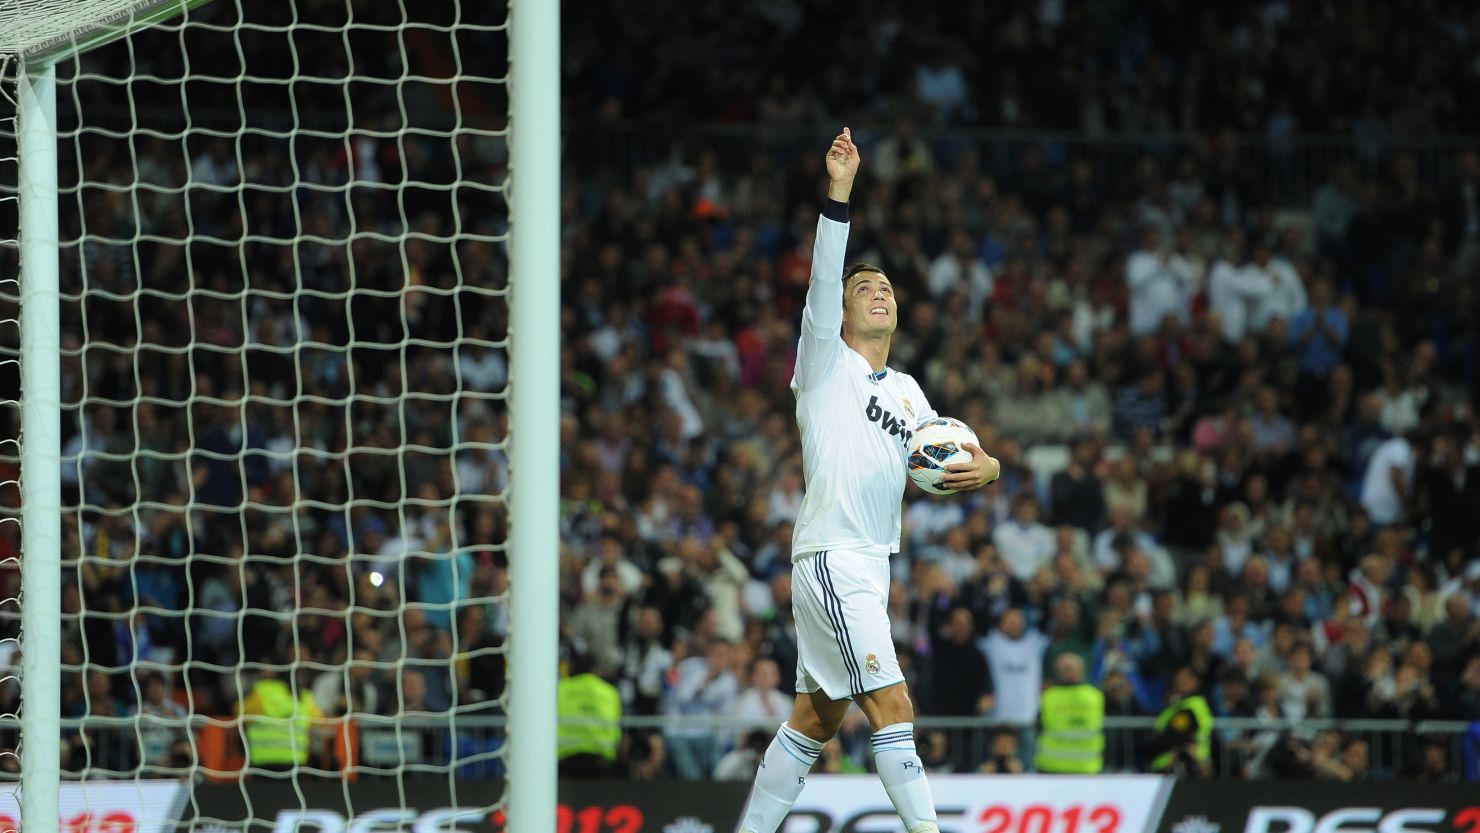 Cristiano Ronaldo was on target once again as Real Madrid came from behind to see off Deportivo La Coruna.